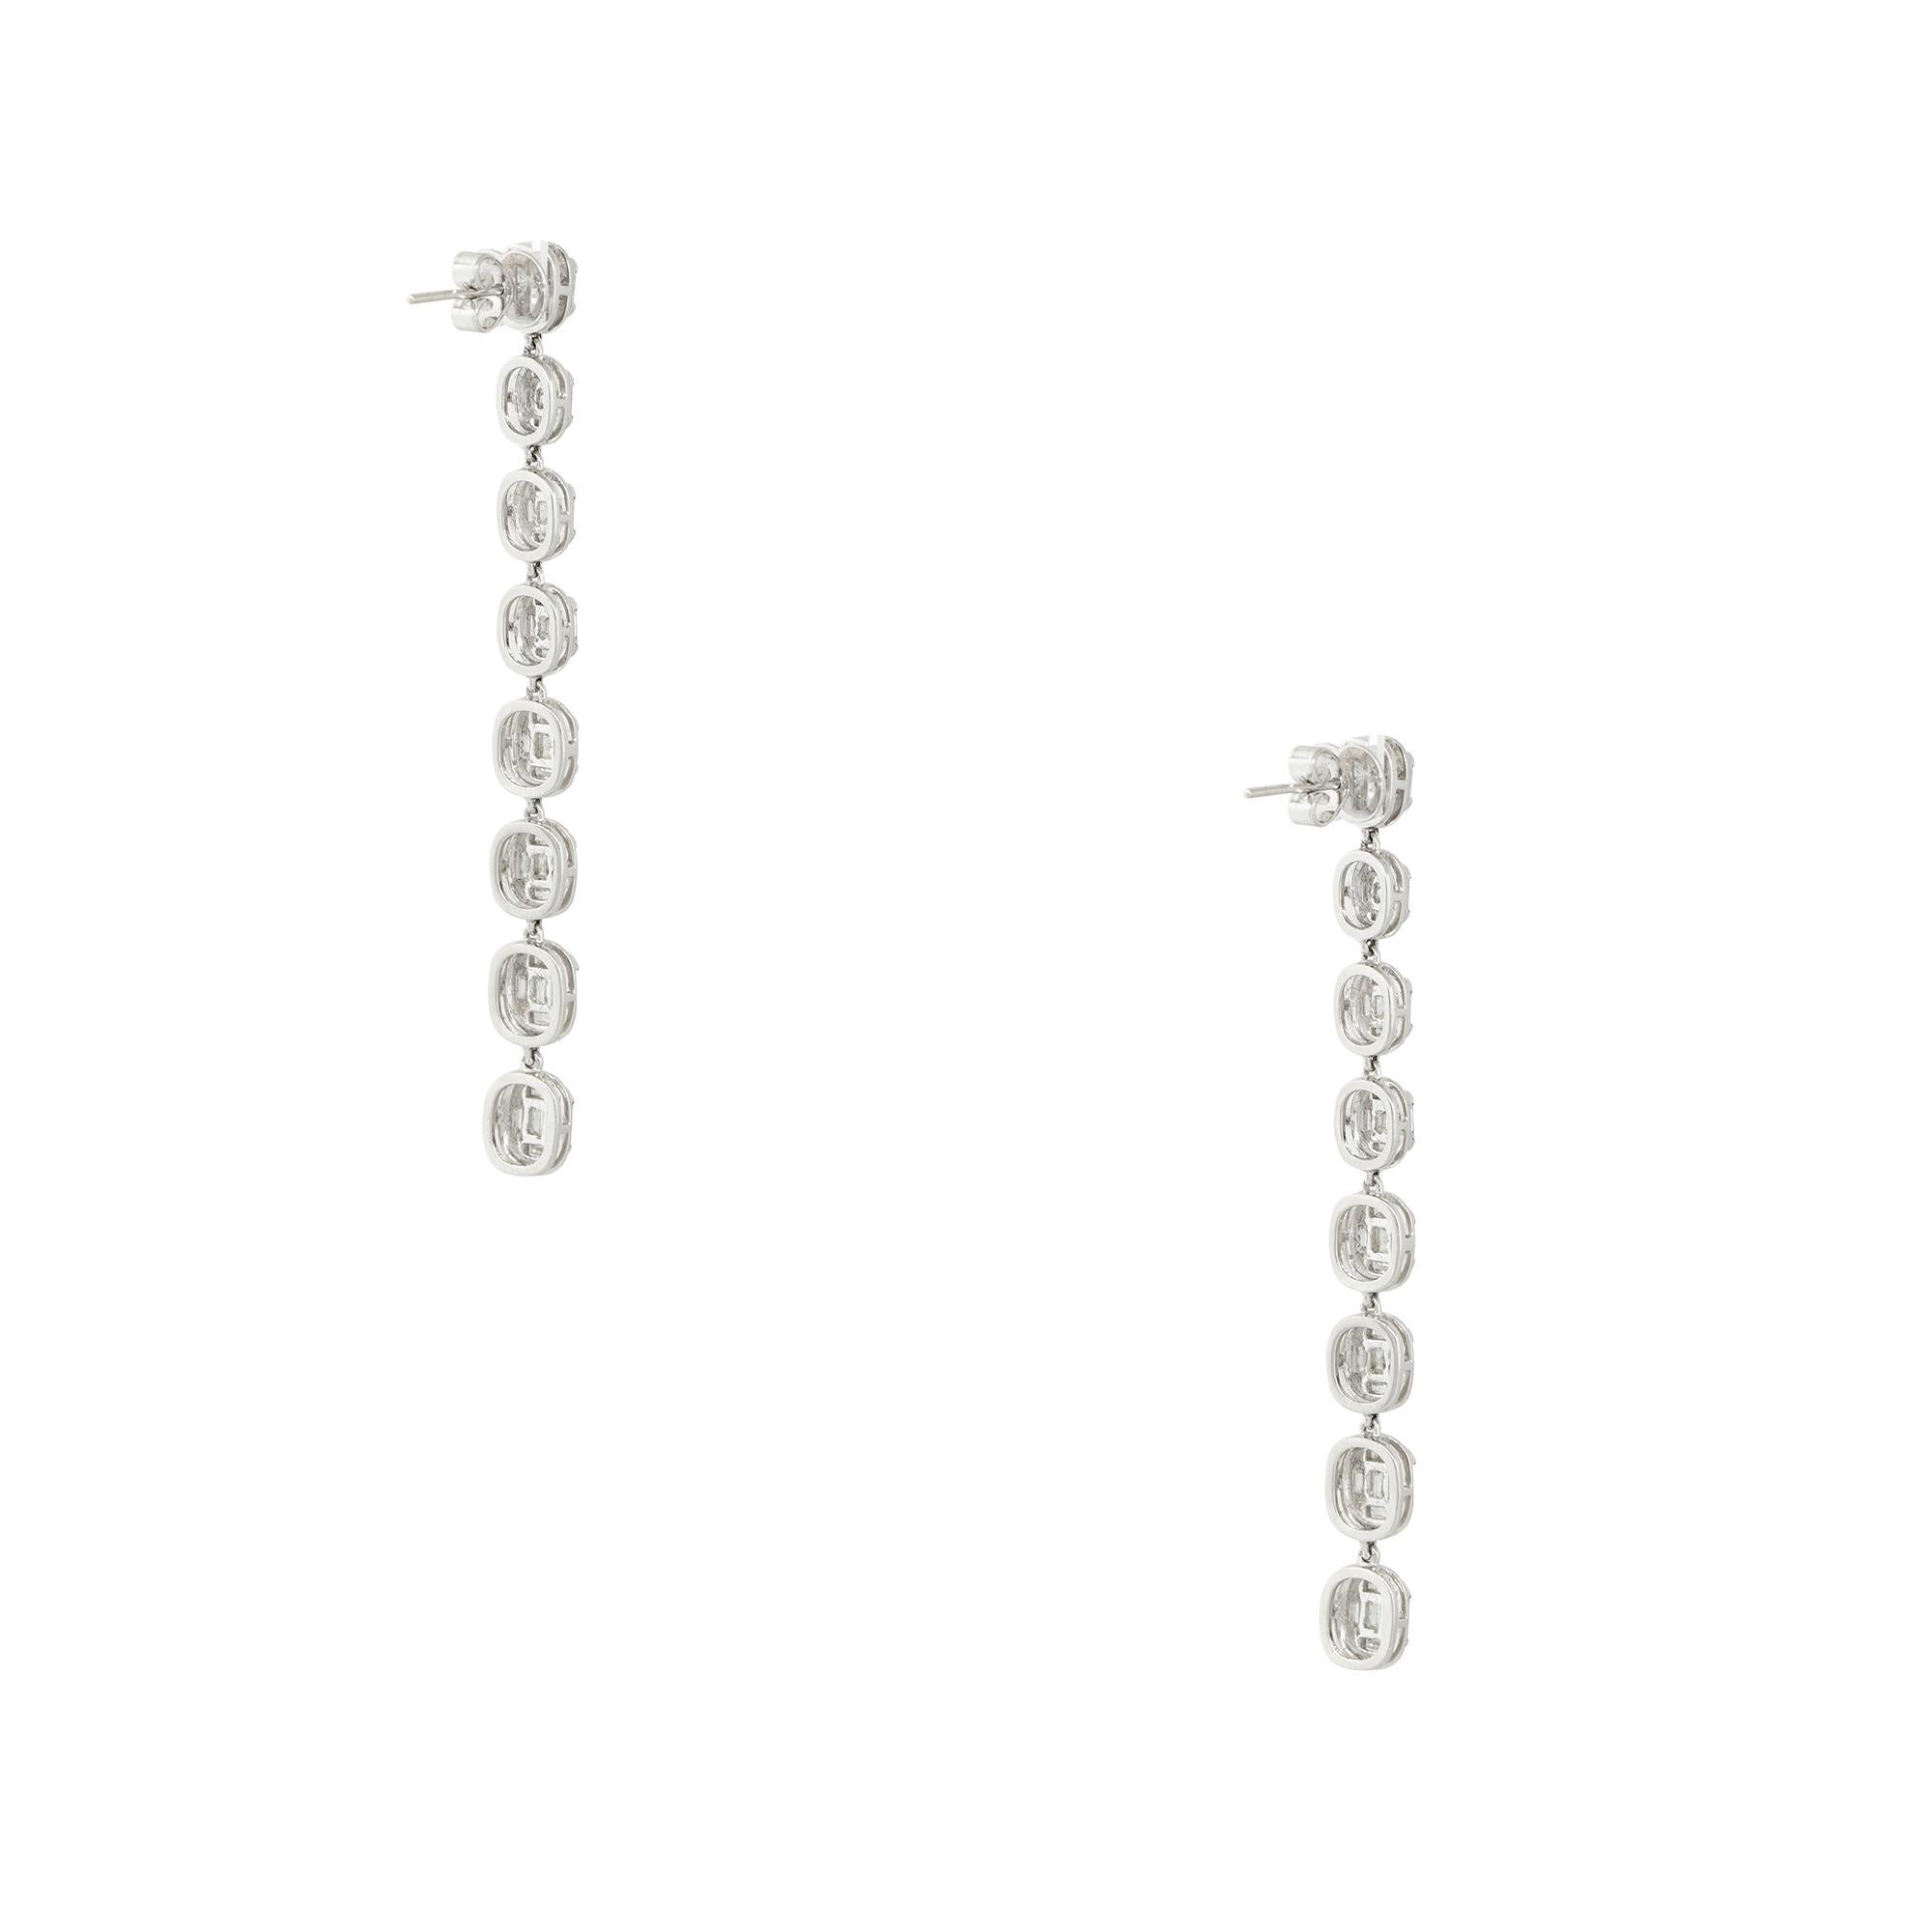 18k White Gold 3.06ctw Diamond Mosaic Drop Earrings

Material: 18k White Gold
Diamond Details: Approximately 3.06ctw of Mosaic Set Diamonds
Item Dimensions: 7.17mm x 3.82mm x 71.96mm
Earring Backs: Friction Backs
Additional Details: This item comes